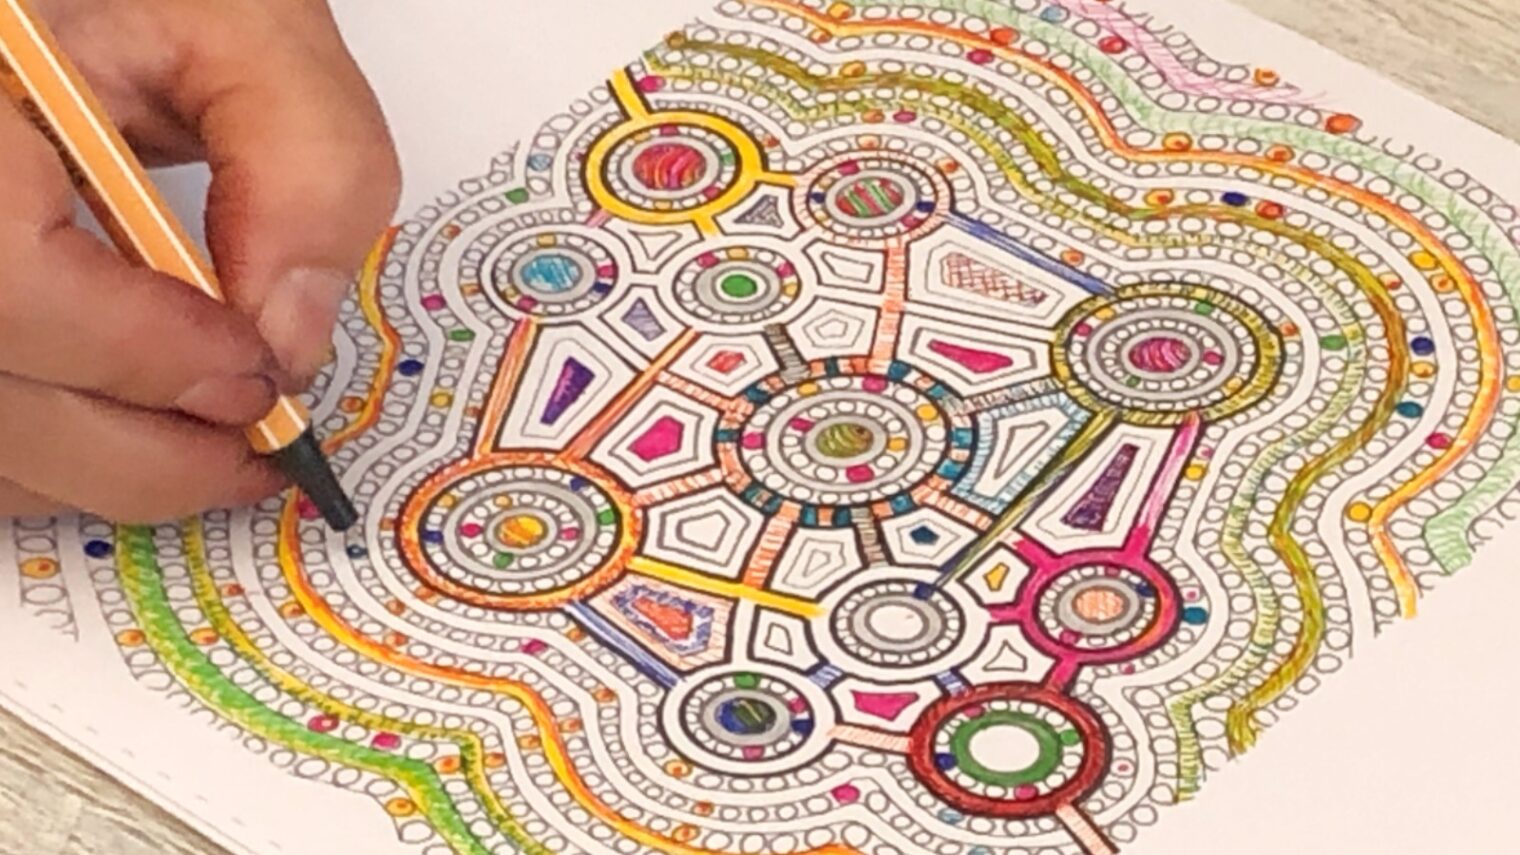 8 Adult Coloring Books to Reduce Social Anxiety